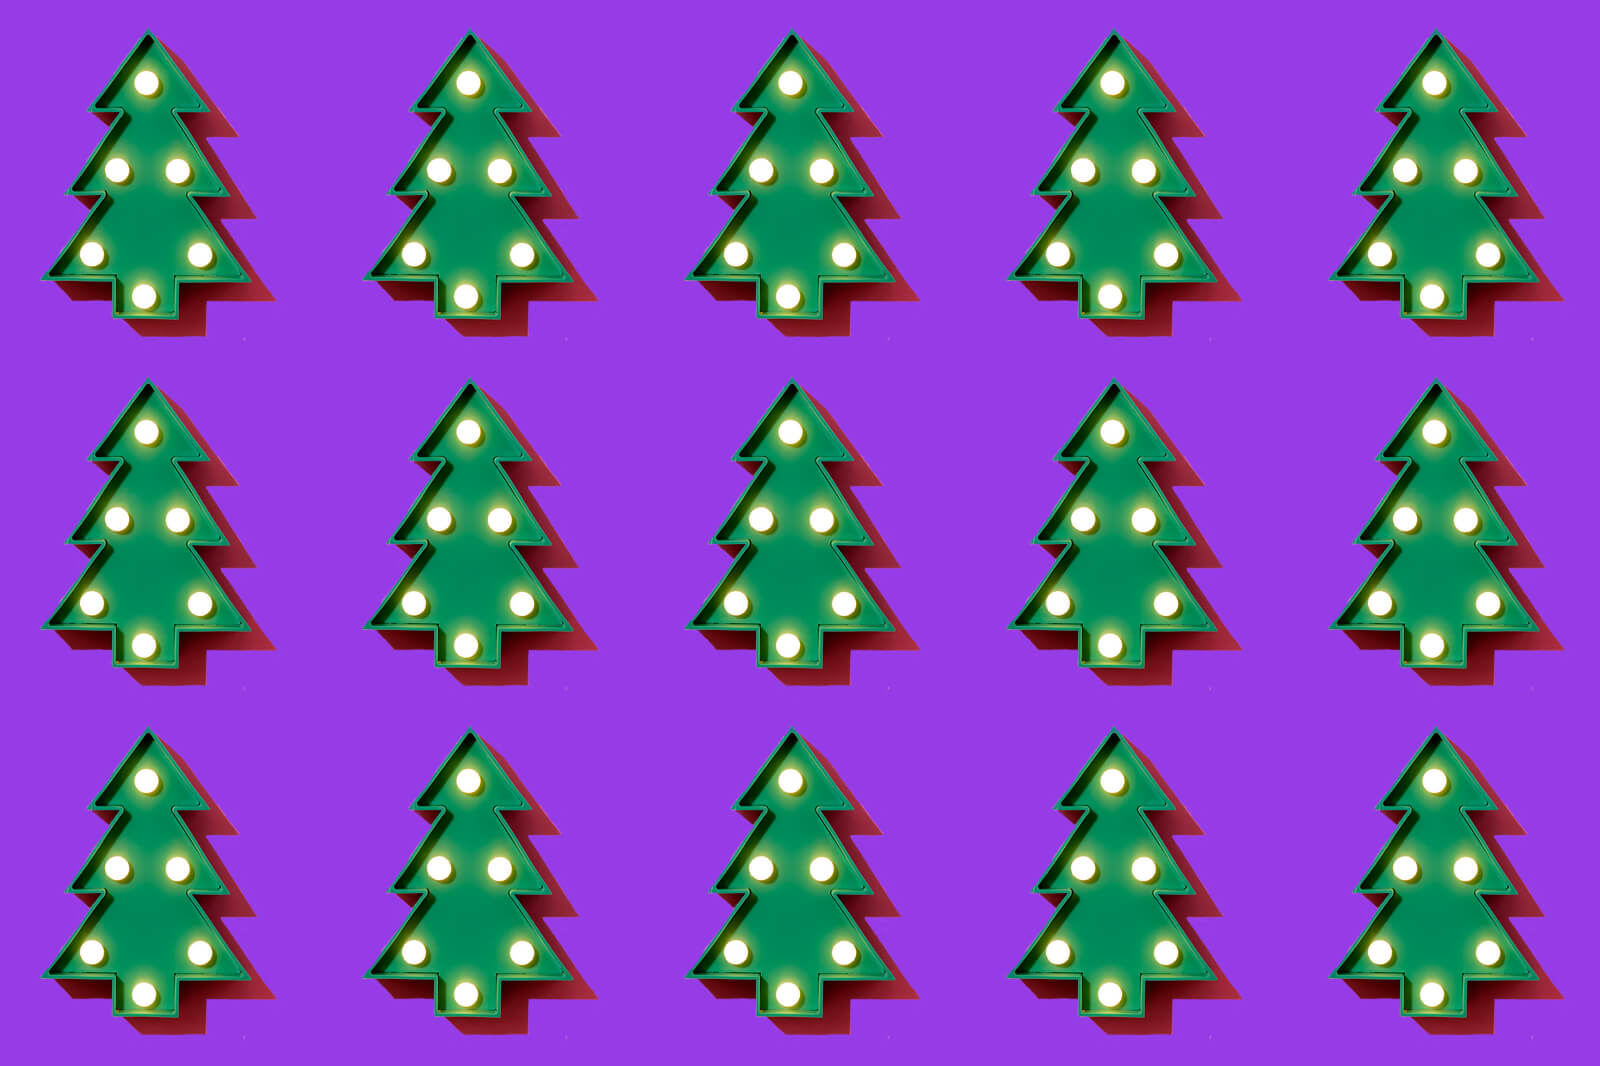 a header image for slido's christmas themed blog depicting 15 christmas trees on a solid purple background